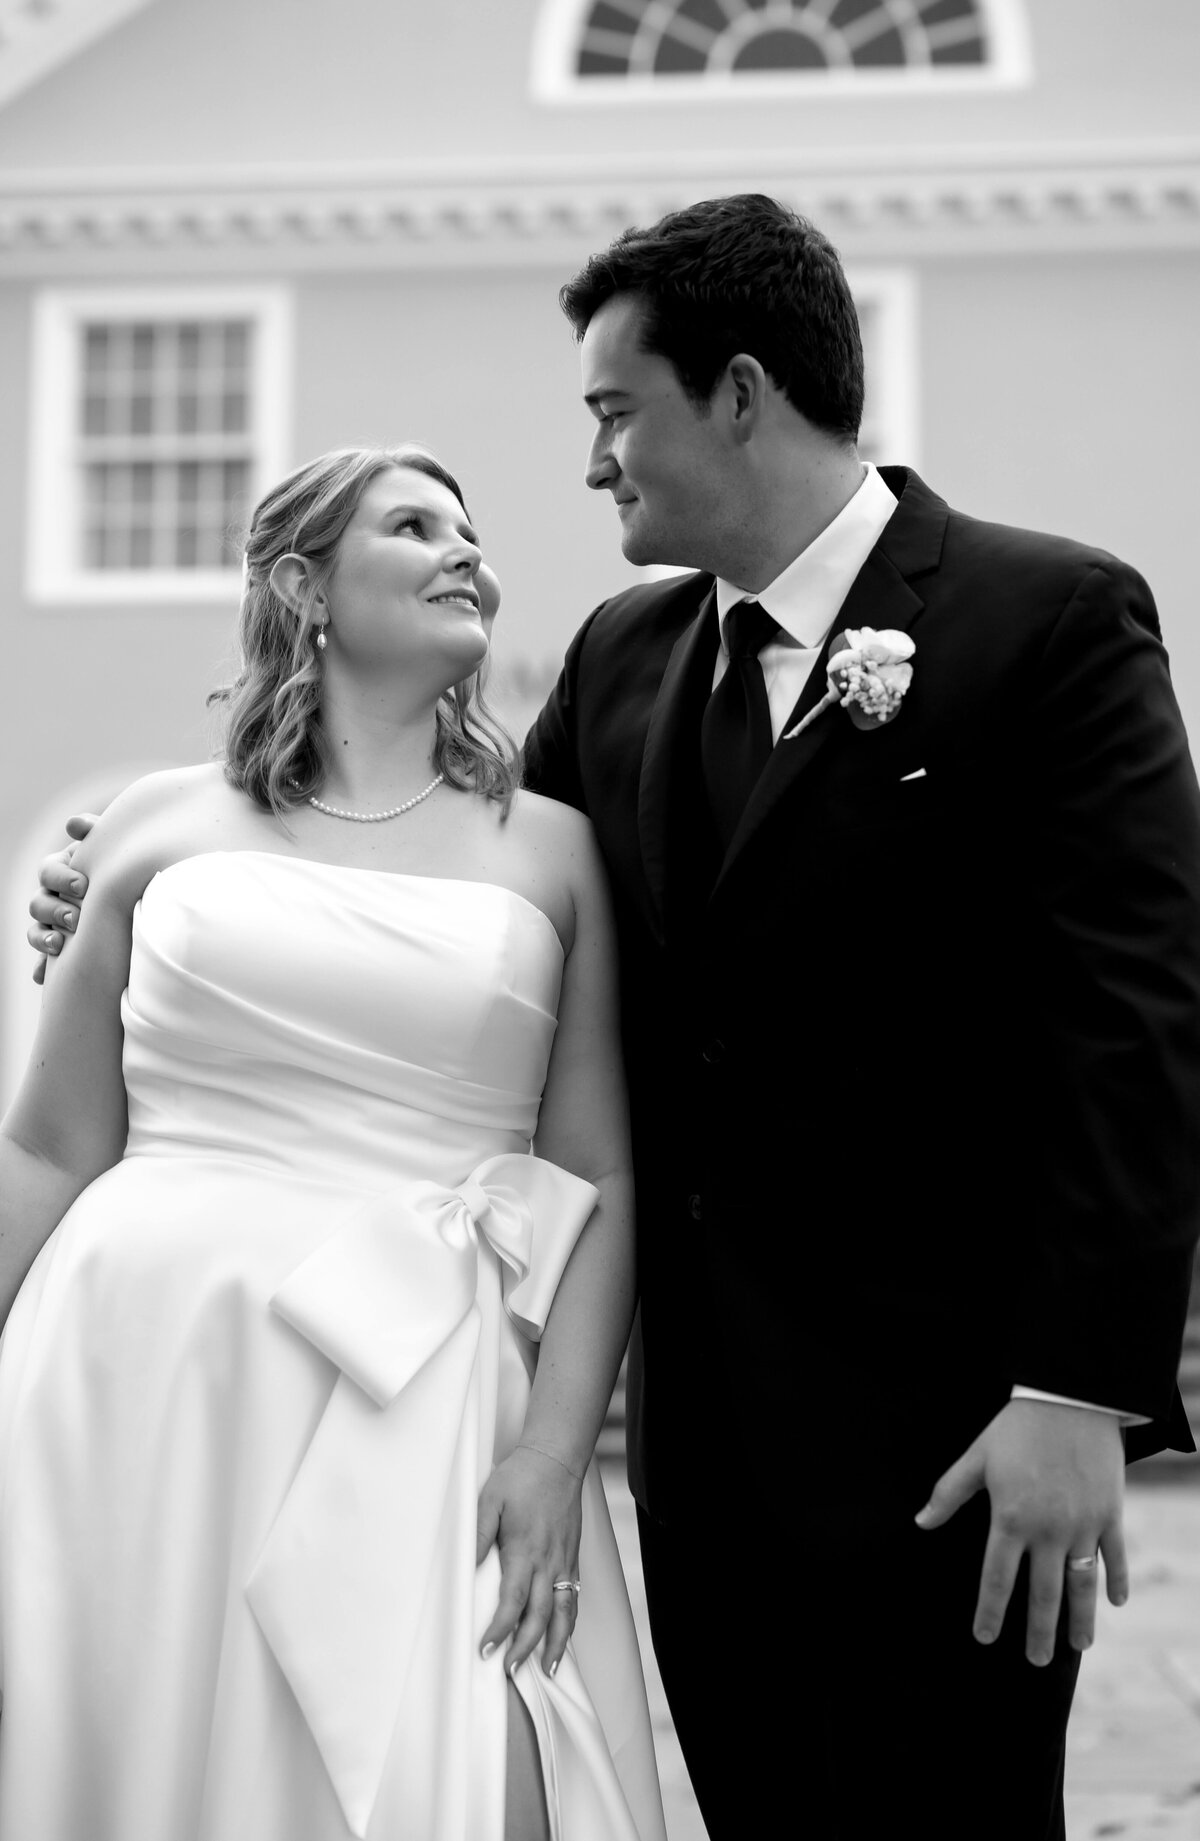 black and white wedding photo with bride adn groom smiling at one another with the grooms arm around the brides shoulder